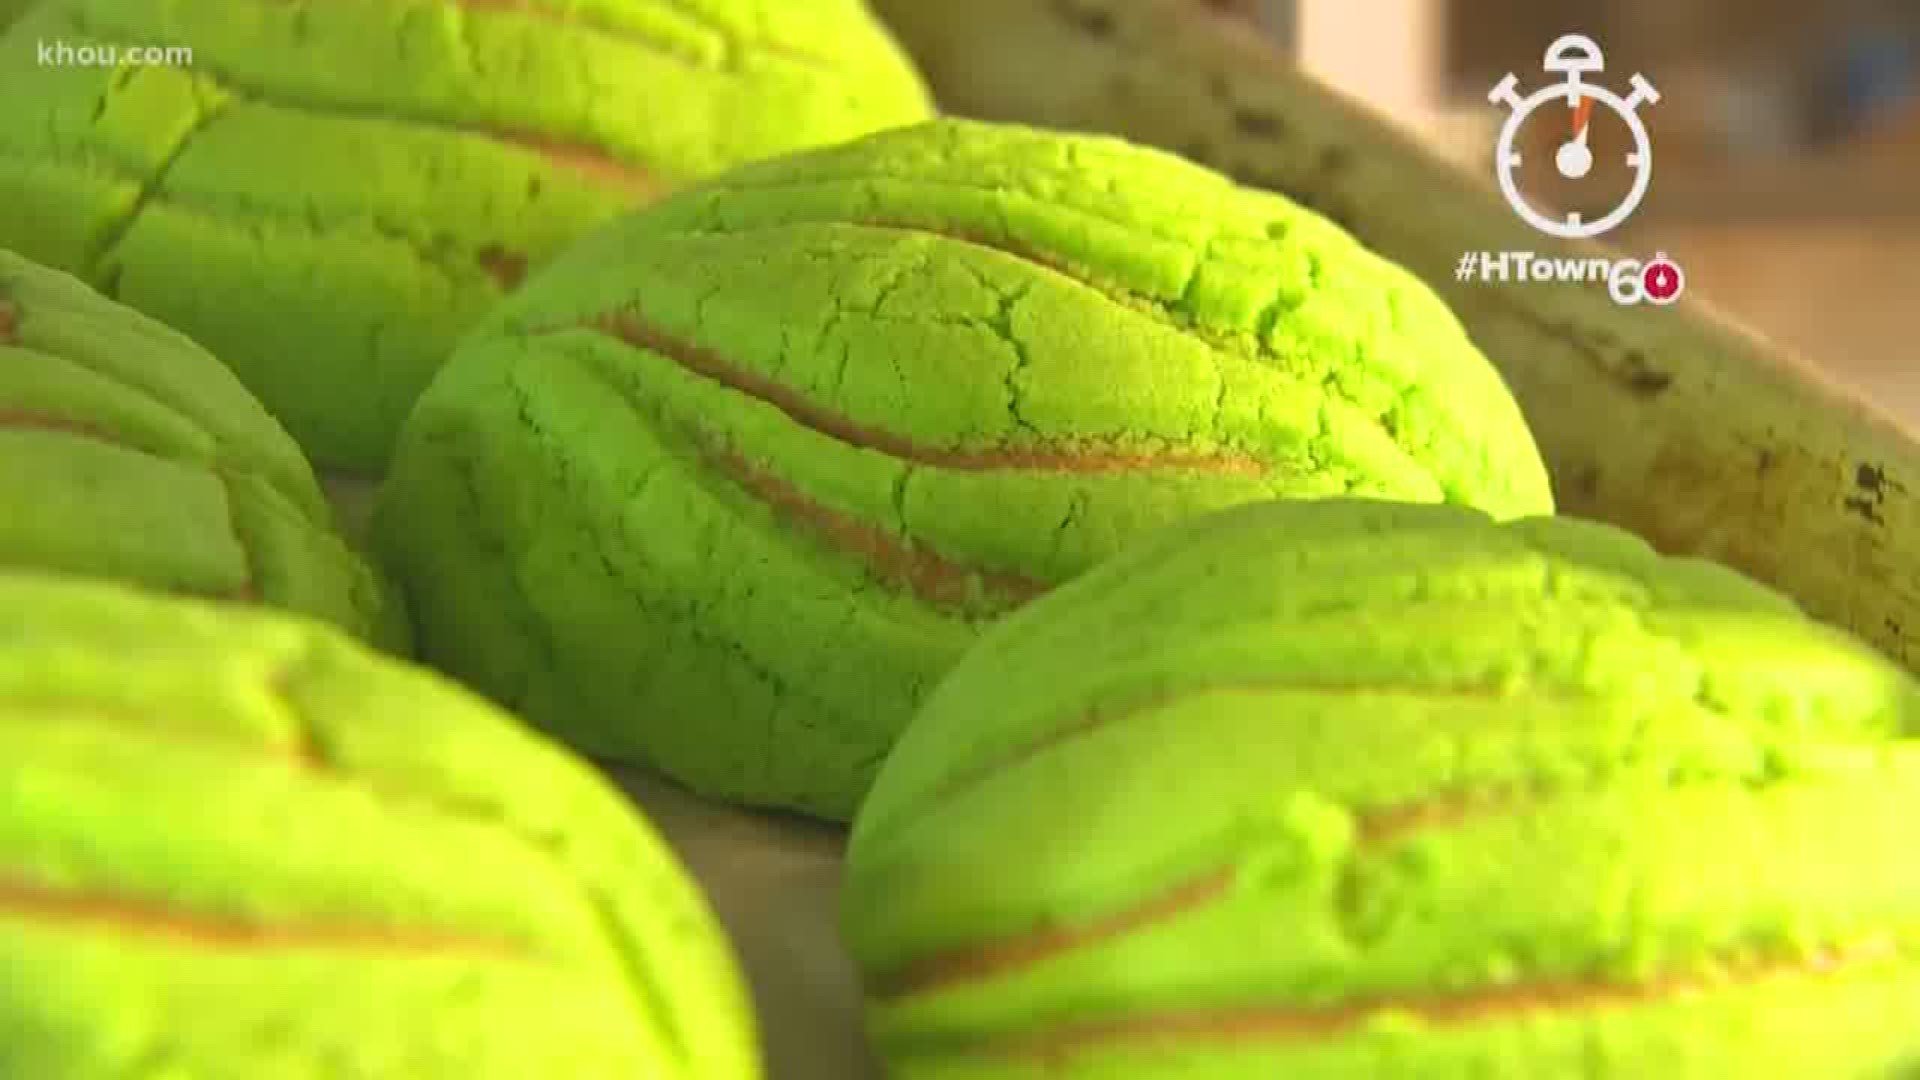 It's a sweet treat perfect for a holiday dessert! In this morning's HTown60, Ruben Galvan takes us to Mi Tienda for a first-hand look at their pan dulce.